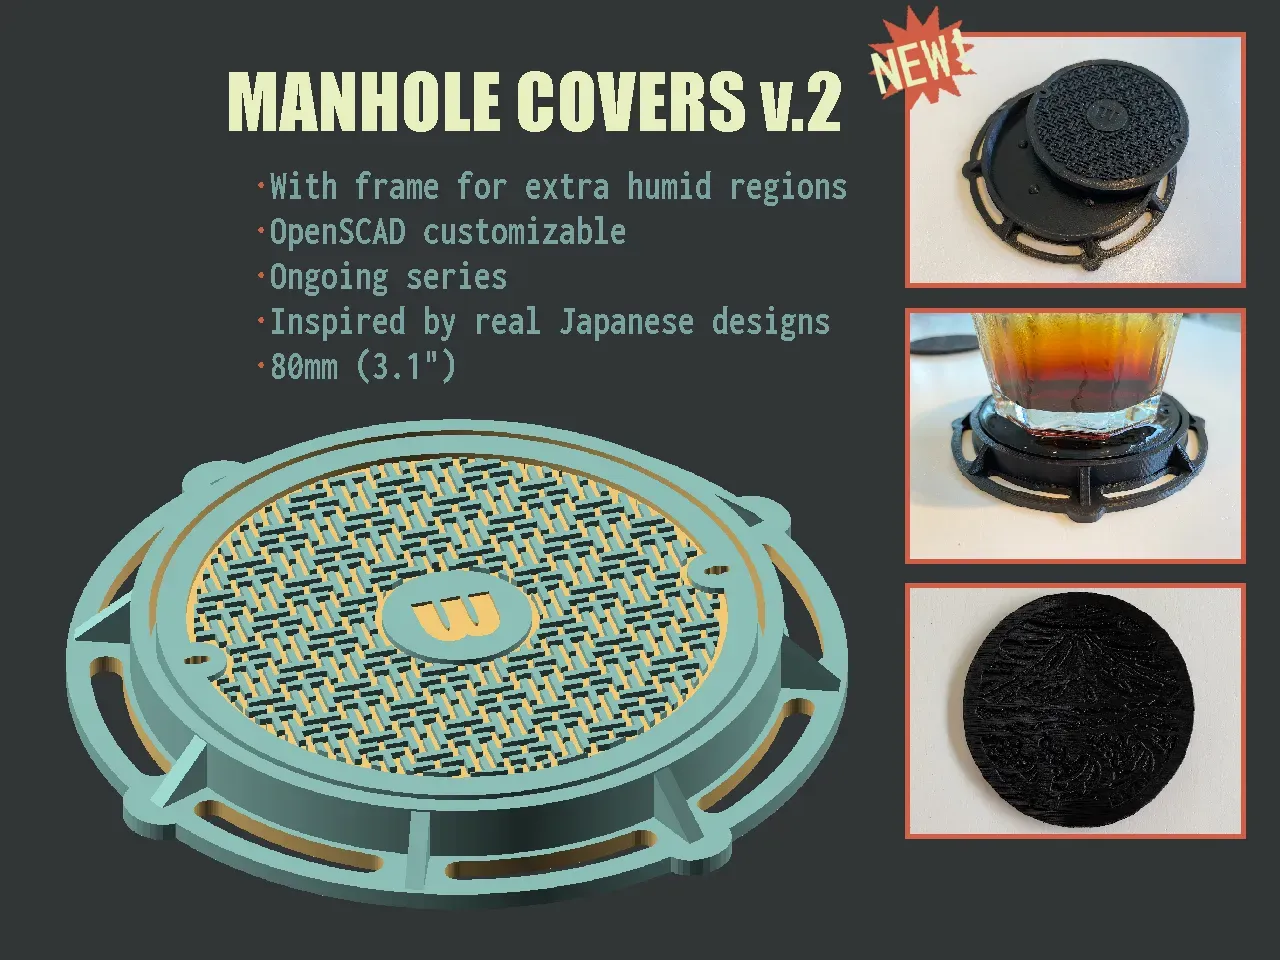 Japanese Manhole Covers v.2 with Frame by Arnaud The 100 Yen 